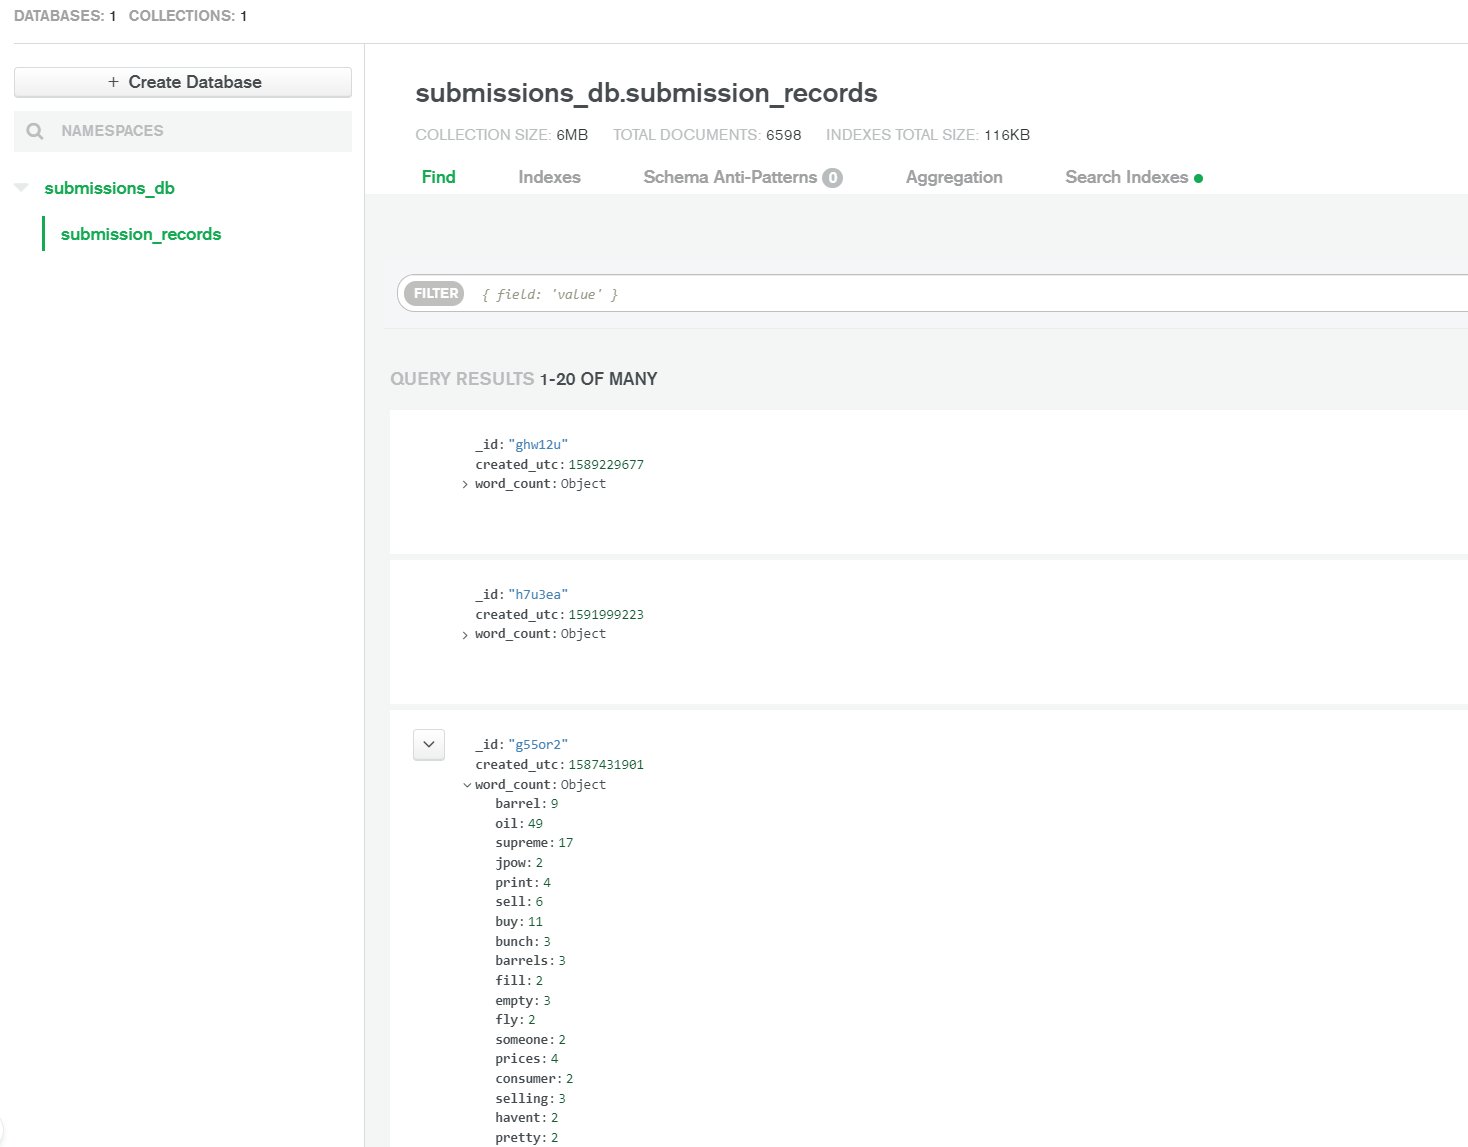 Screenshot of MongoDB Atlas with list of documents representing subreddit submissions